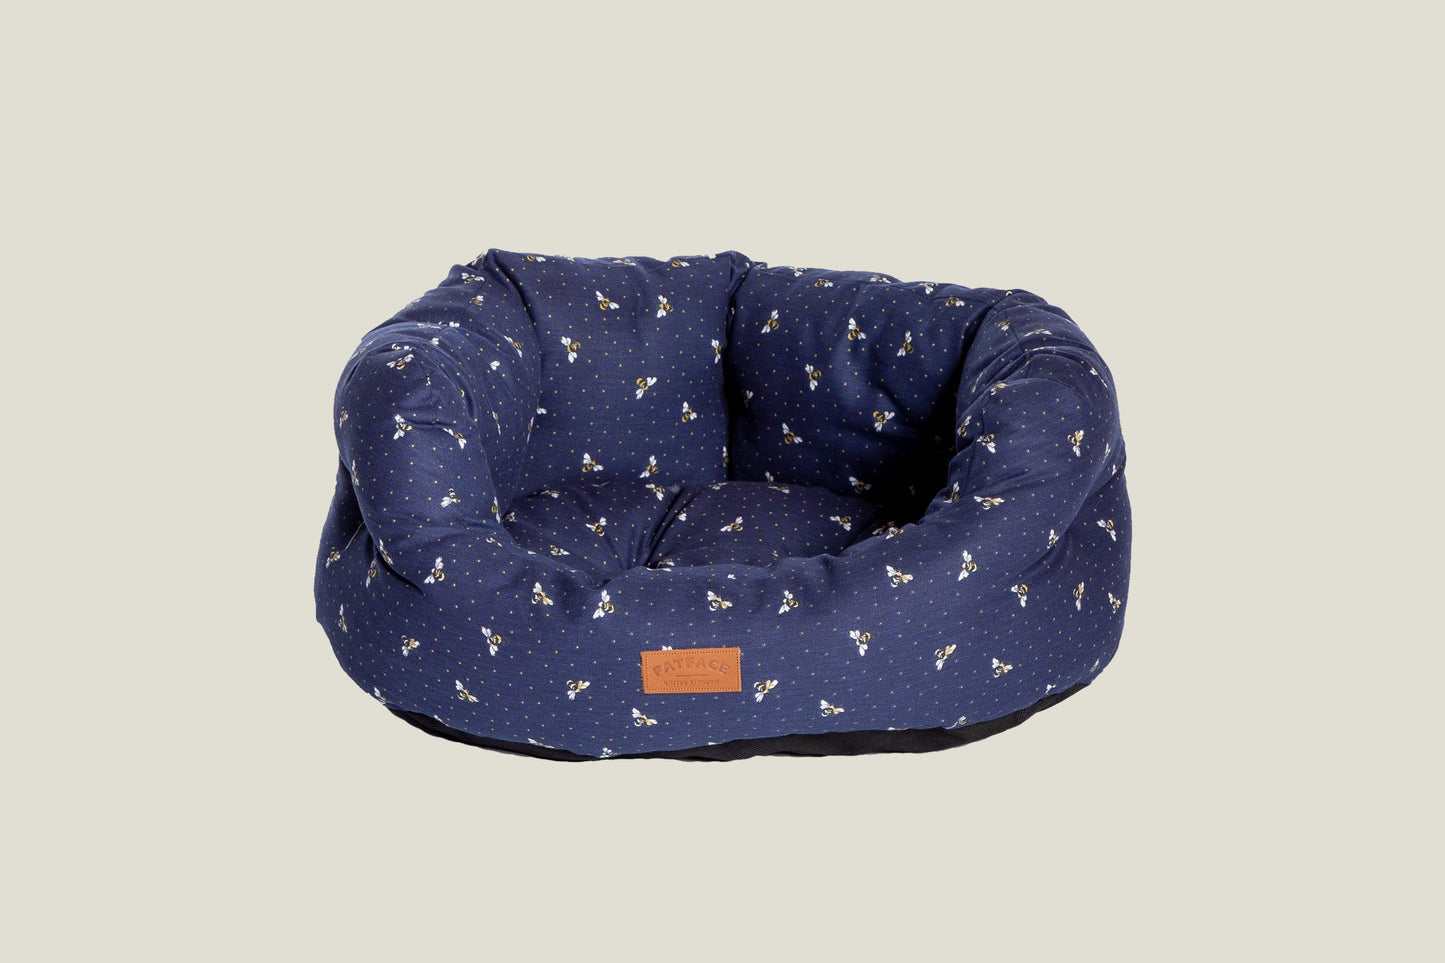 FatFace Spotty Bees Deluxe Slumber Bed